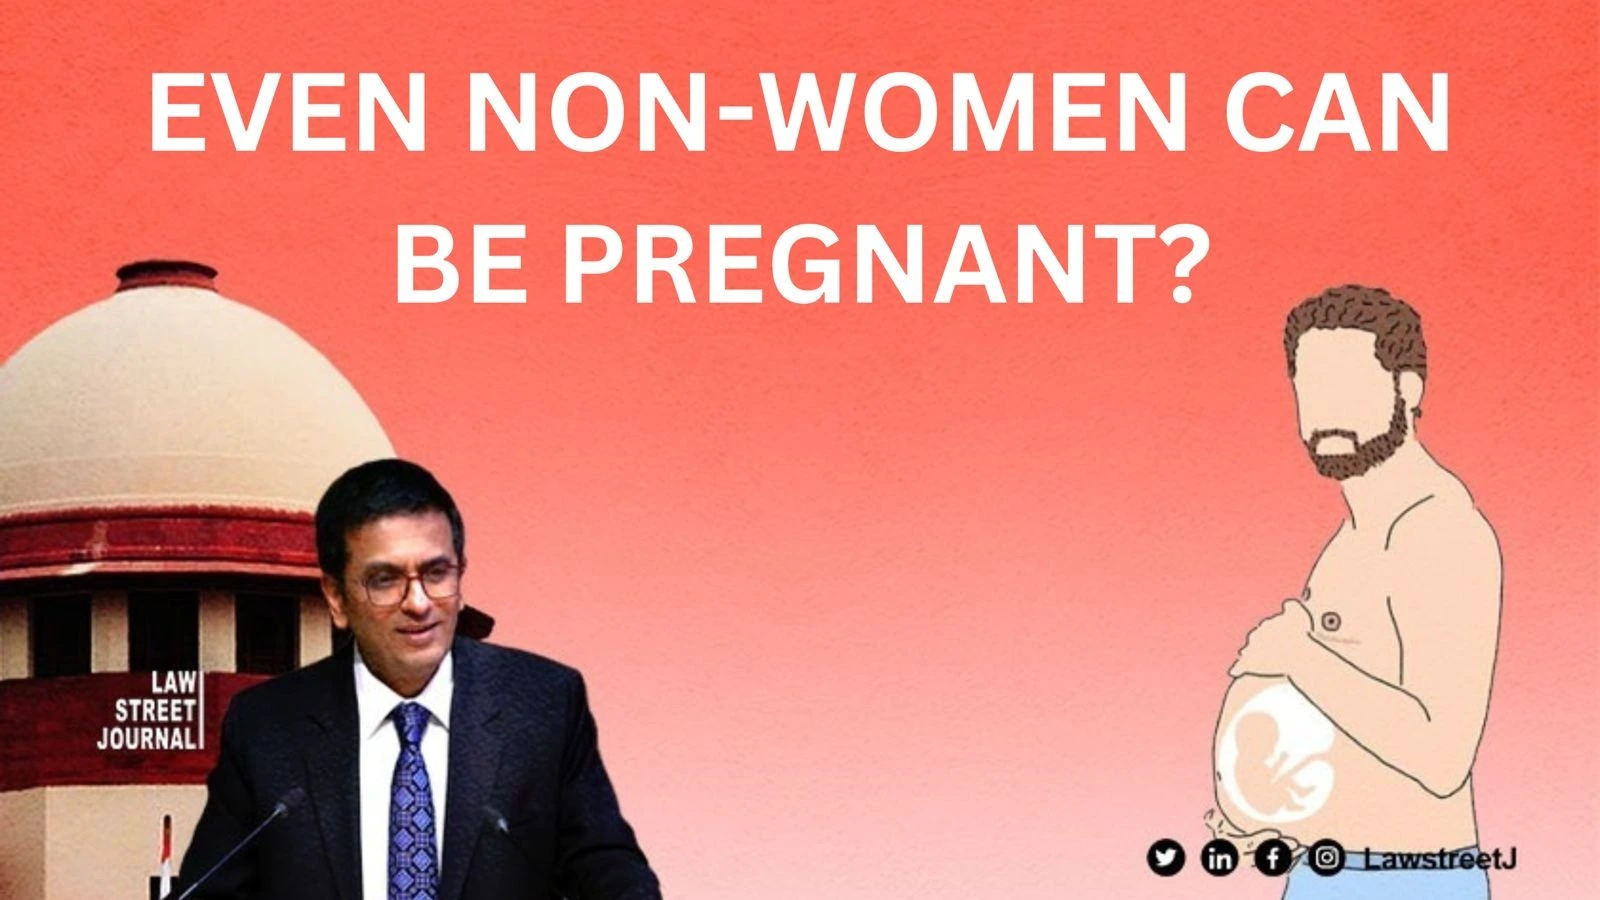 Even non binary persons and transgender men can be pregnant says Supreme Court of India